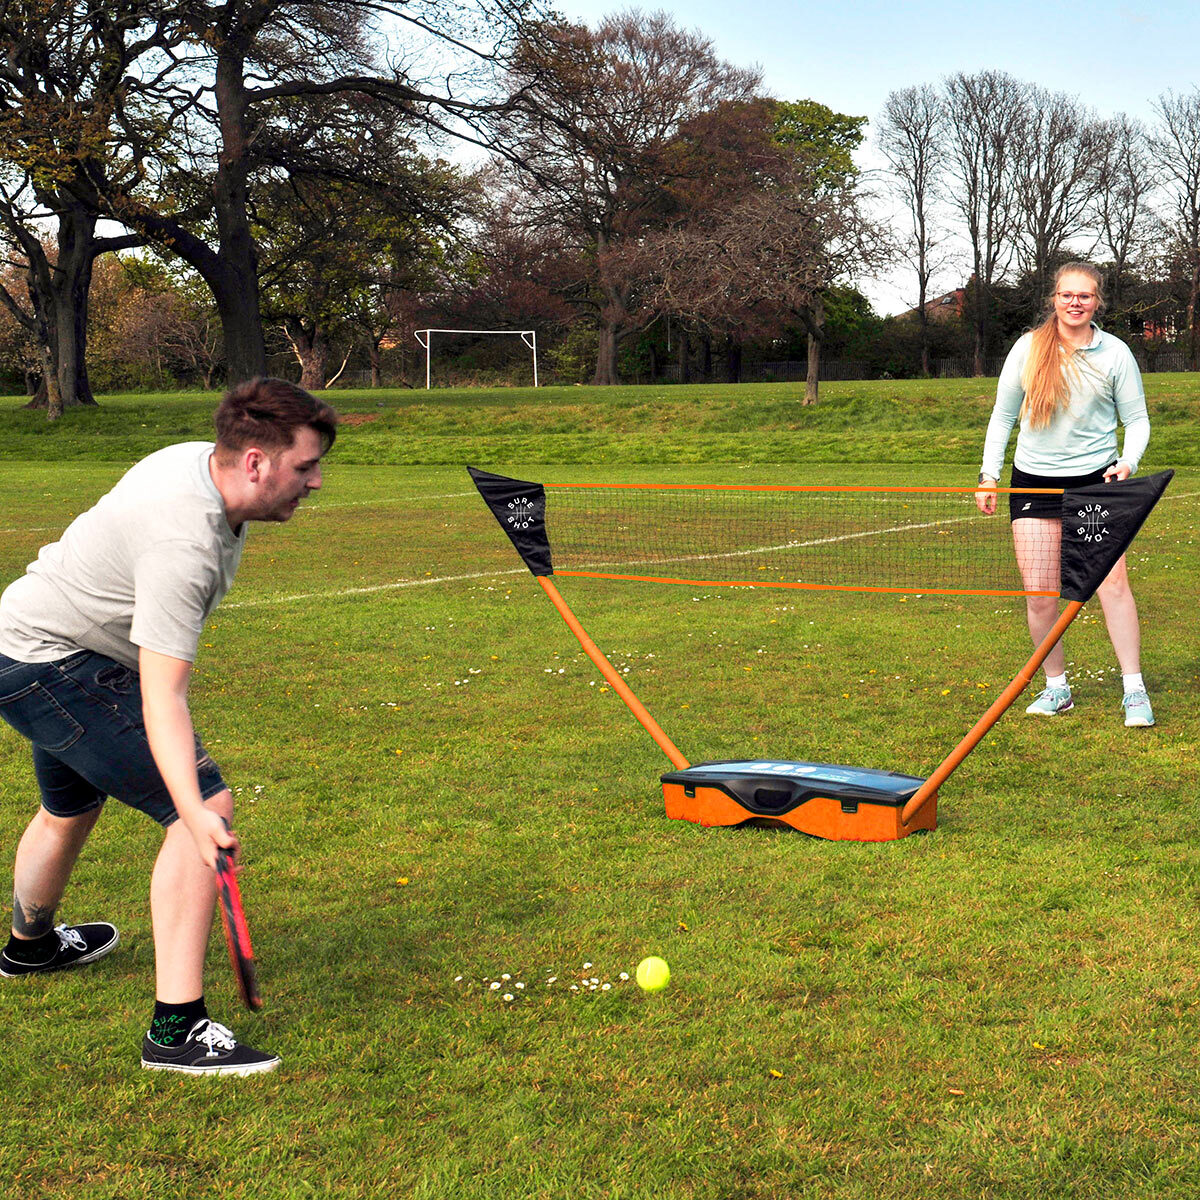 Lifestyle image for a game of Tennis using the Sureshot 3 in 1 Garden set